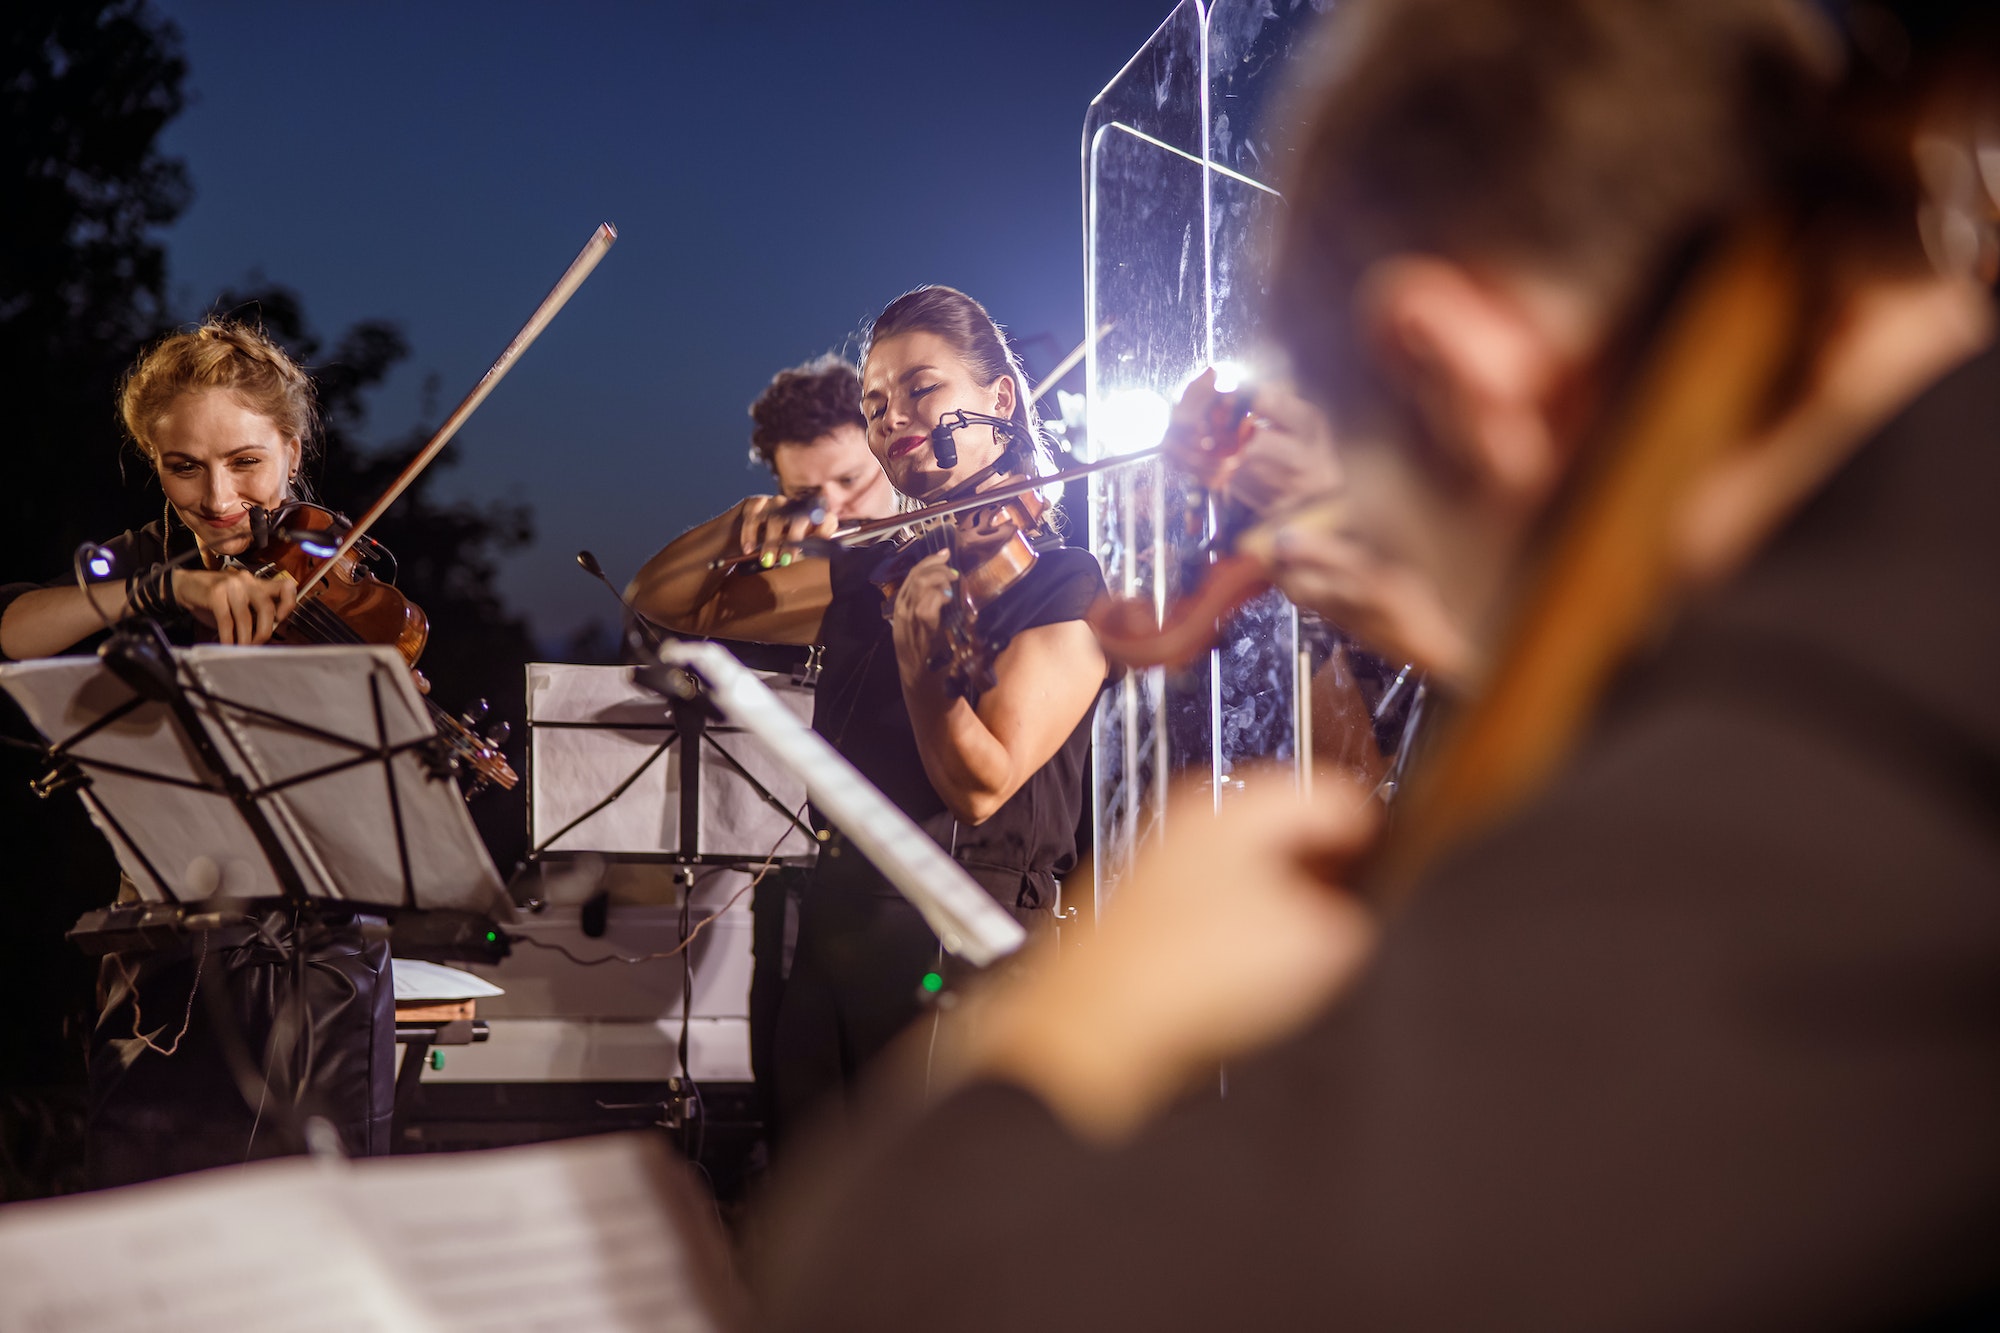 Violin players playing in orchestra at night outdoor concert